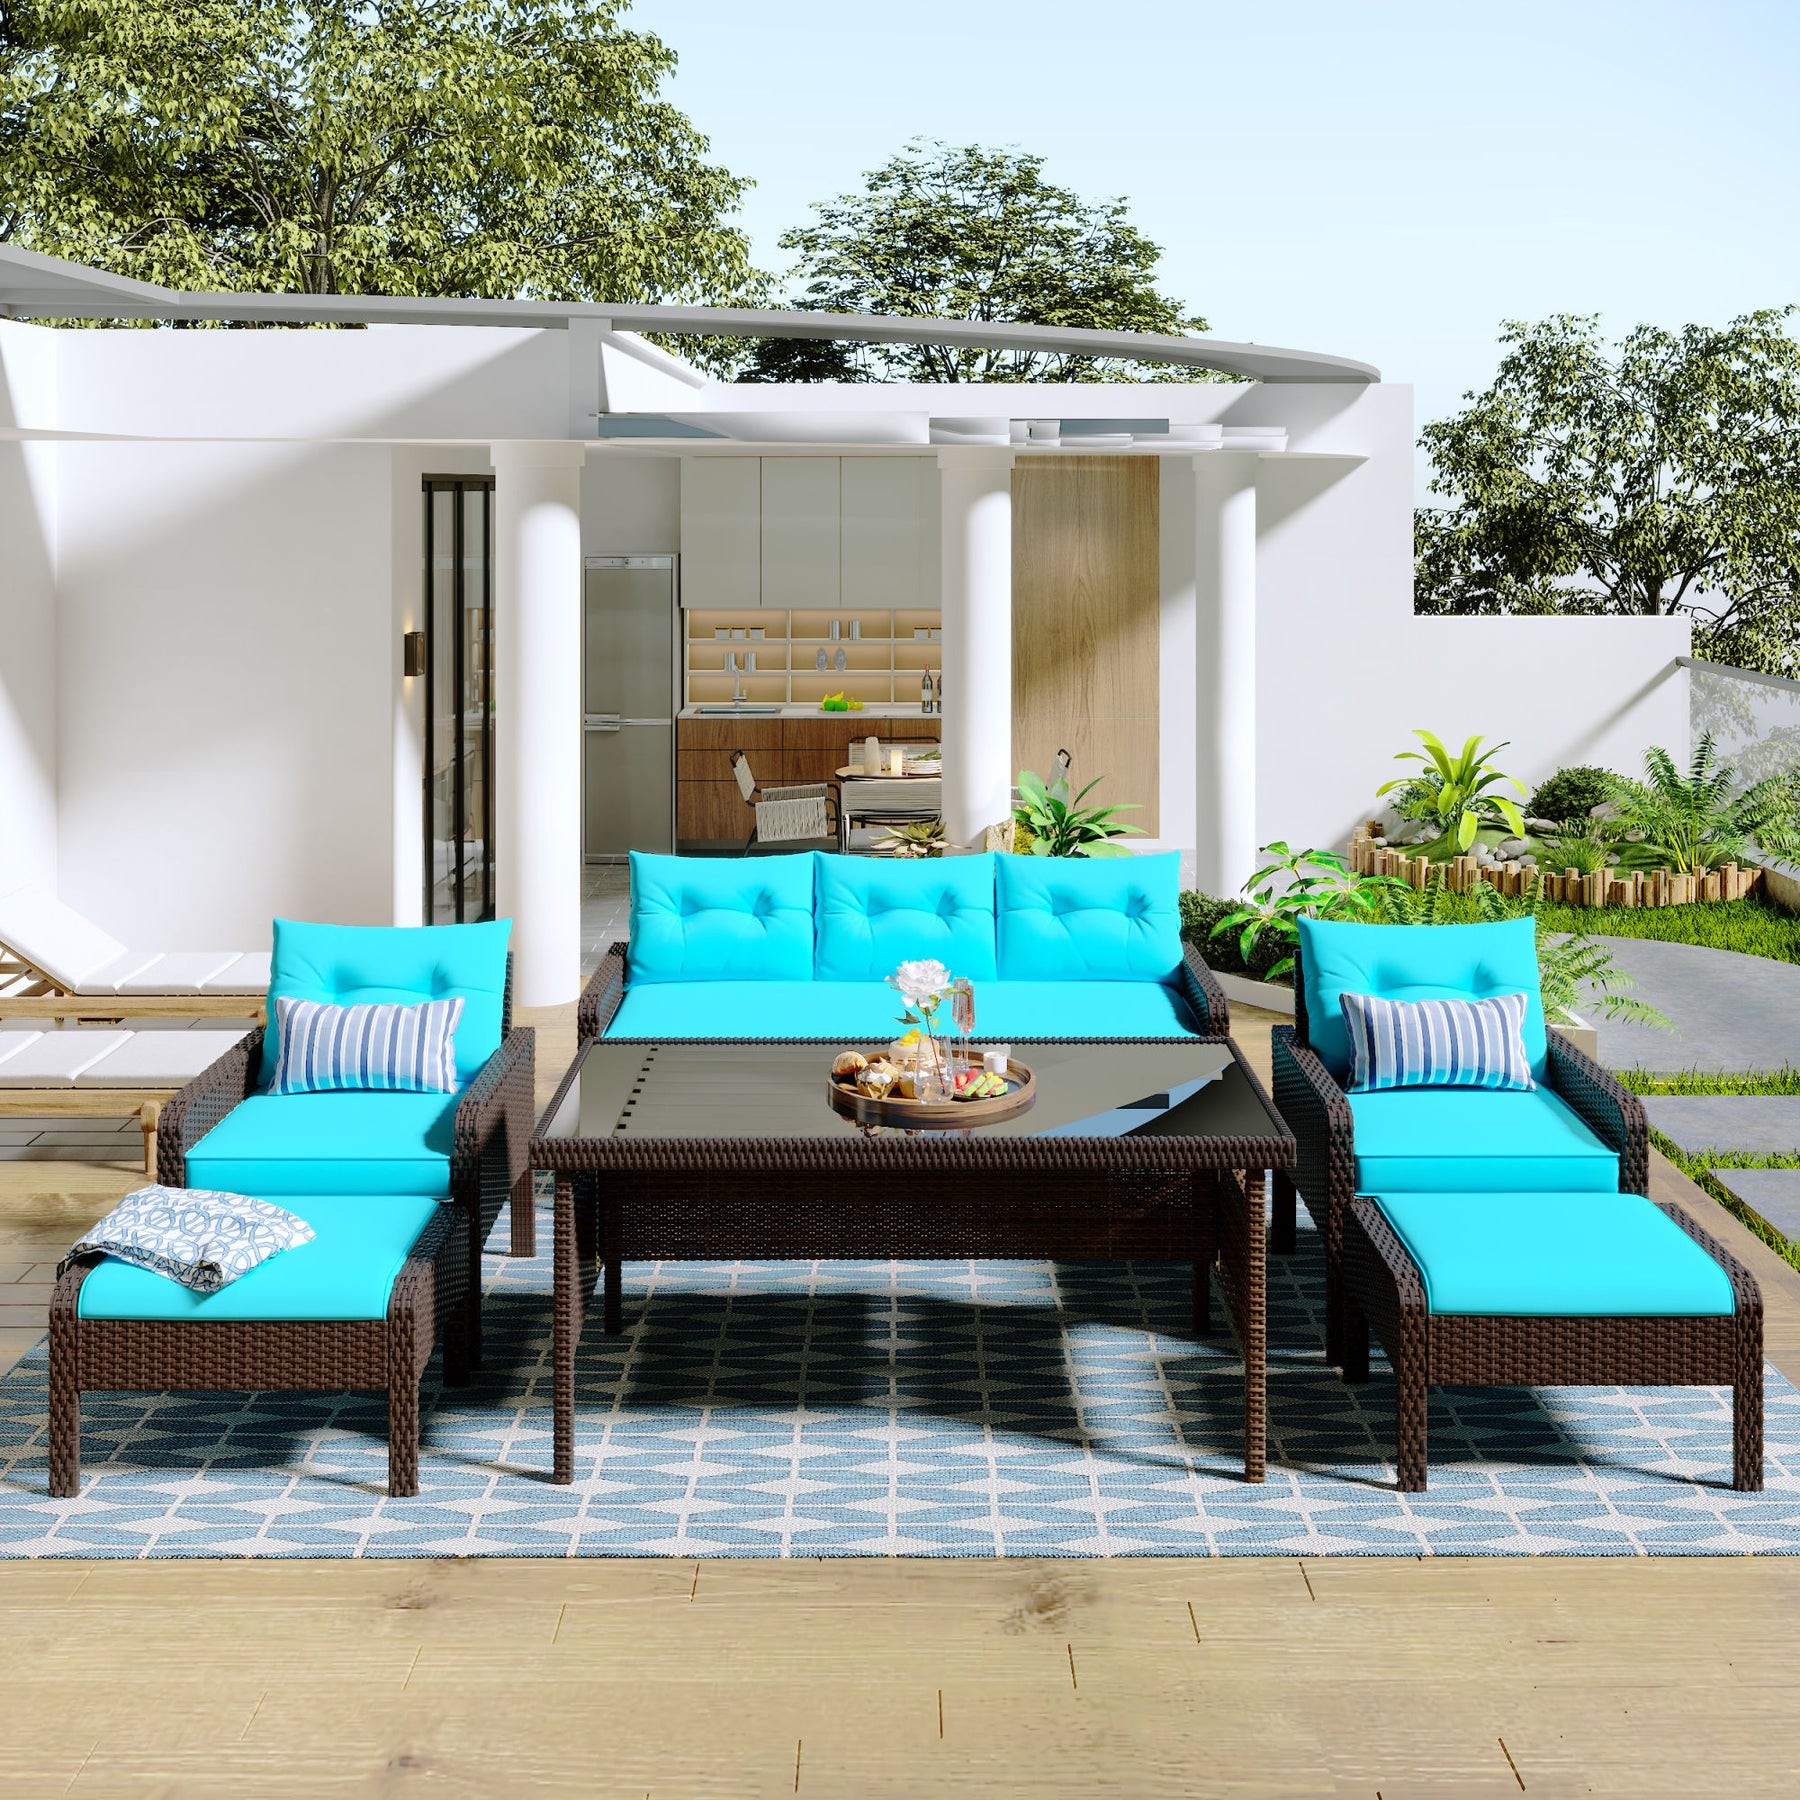 Is Rattan A Good Material For Outdoor Furniture?